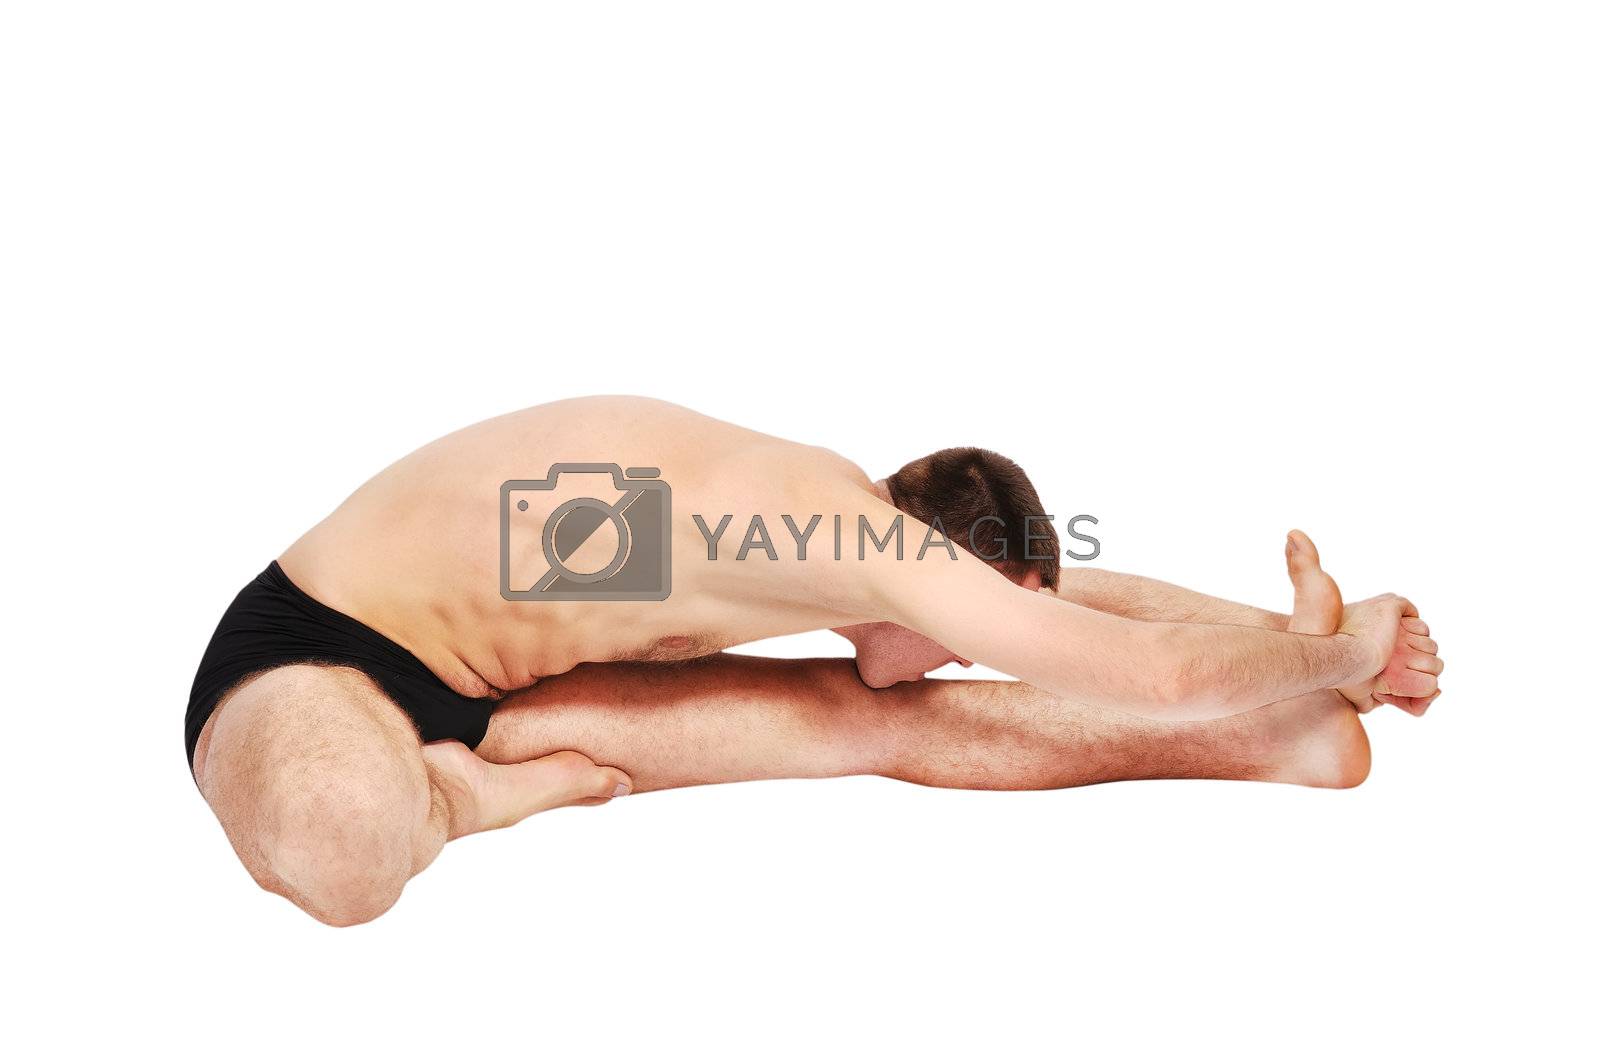 handsome bare-chested man doing yoga